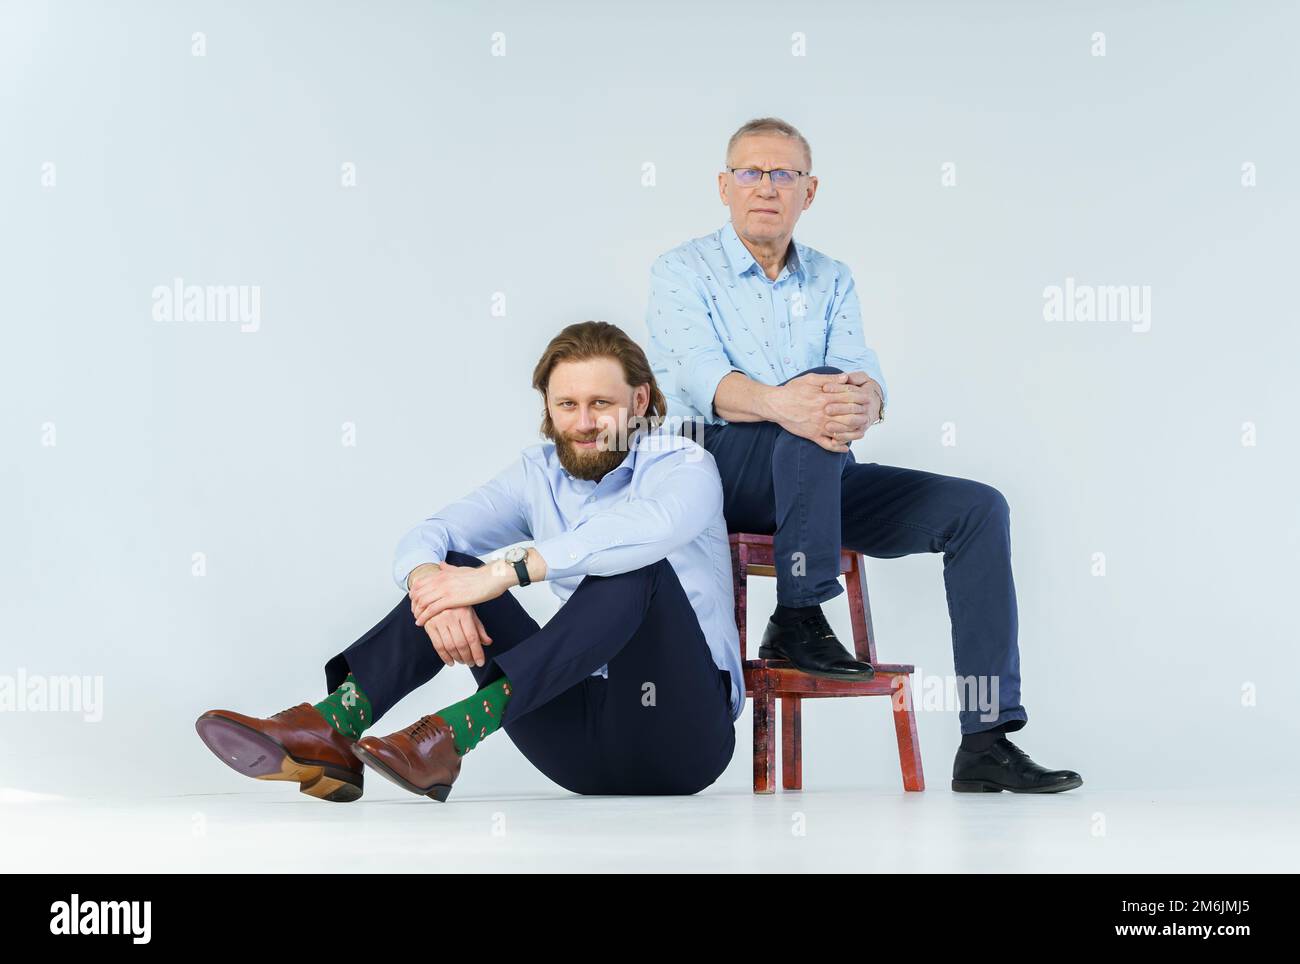 Father sits on the chair and son sits on white background, both men look into the camera, an elderly man in glasses with diopter Stock Photo